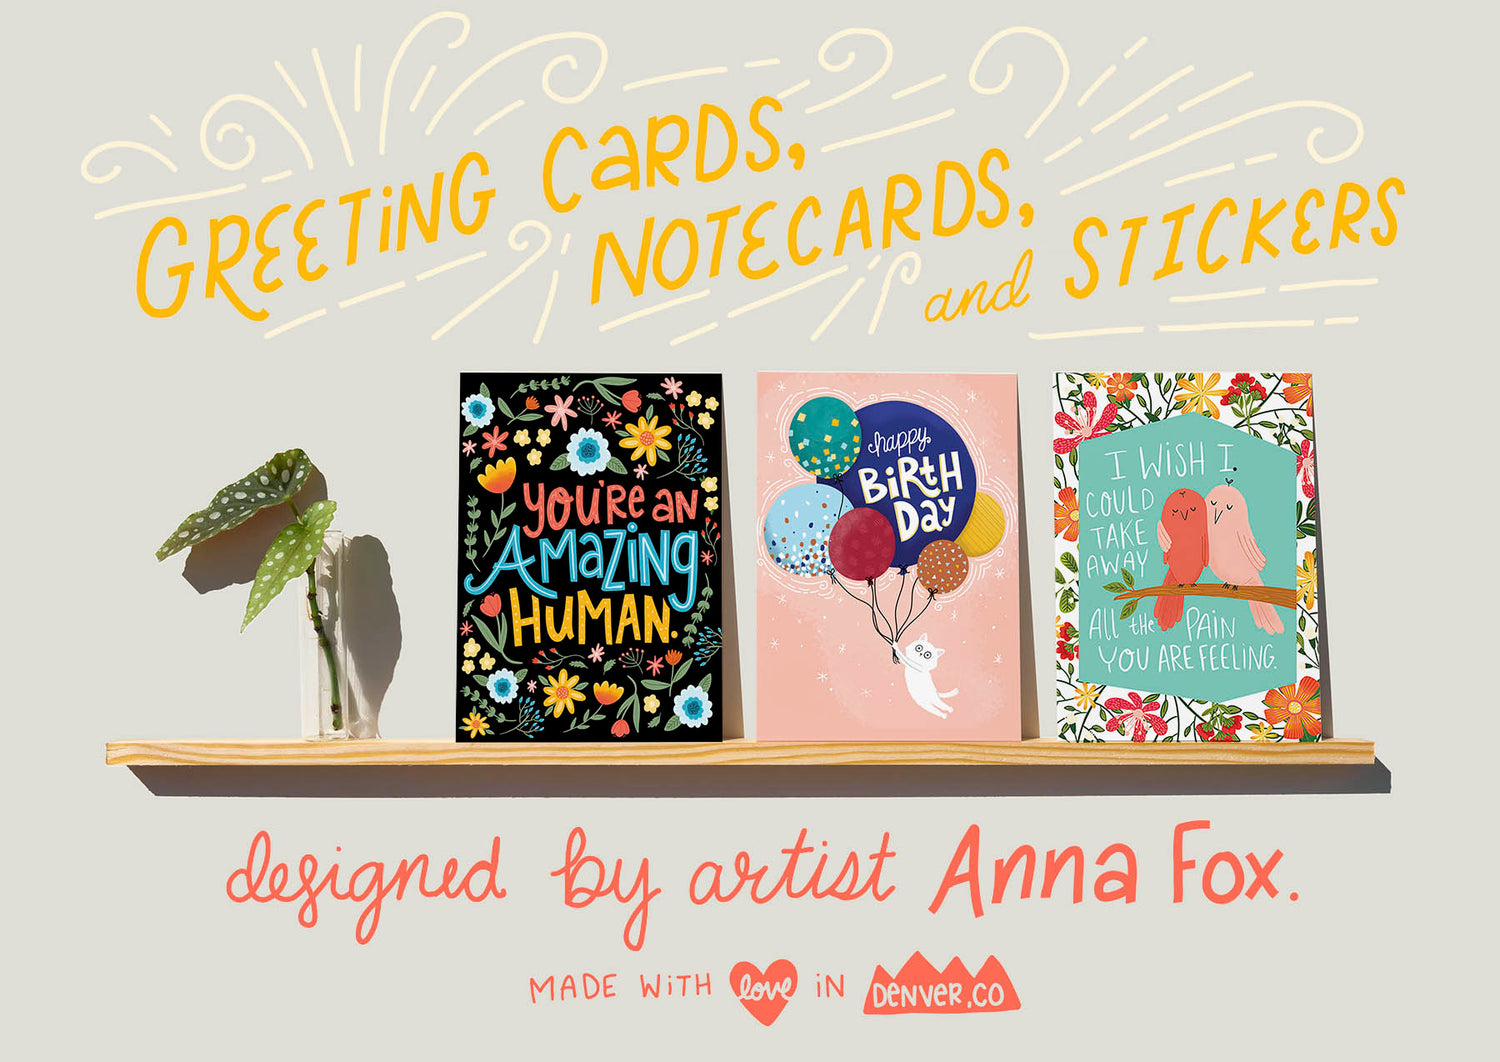 Fox Card Co greeting cards and sticker made in Denver, CO by artist Anna Fox. Small business, woman-owned business. Made in USA greeting cards.